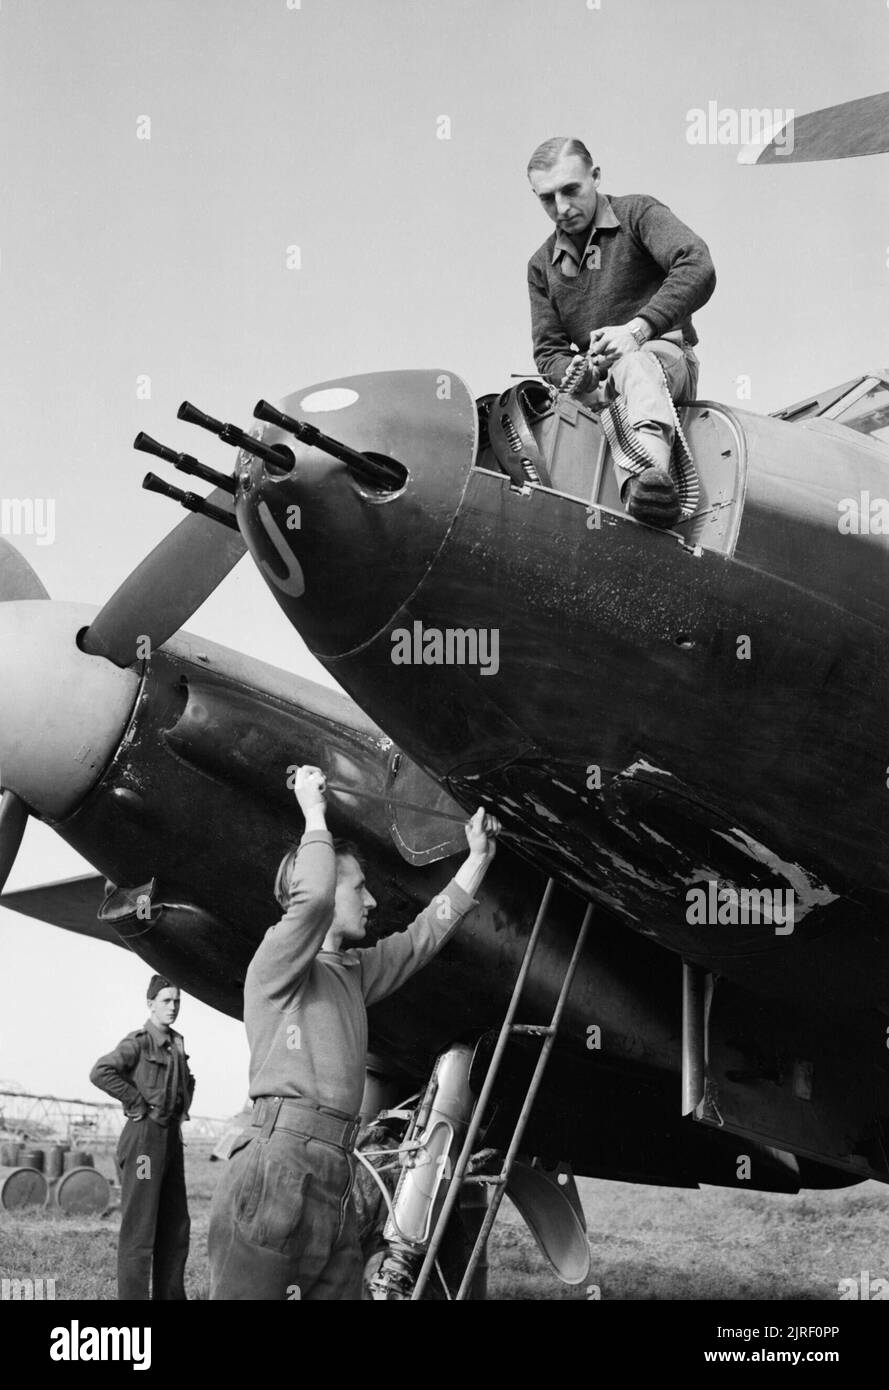 Royal Air Force- Italy, the Balkans and South-east Europe, 1942-1945. Armourers prepare a De Havilland Mosquito FB Mark VI of No. 23 Squadron RAF for night operations at Pomigliano, Italy. Feeding the ammunition belt into a Browning machine gun in the nose is Leading Aircraftman E Hurst of Cheadle, Cheshire, while Leading Airraftman T Hamill of Port Glasgow, Scotland, cleans one of the forward-firing cannon barrels. Stock Photo